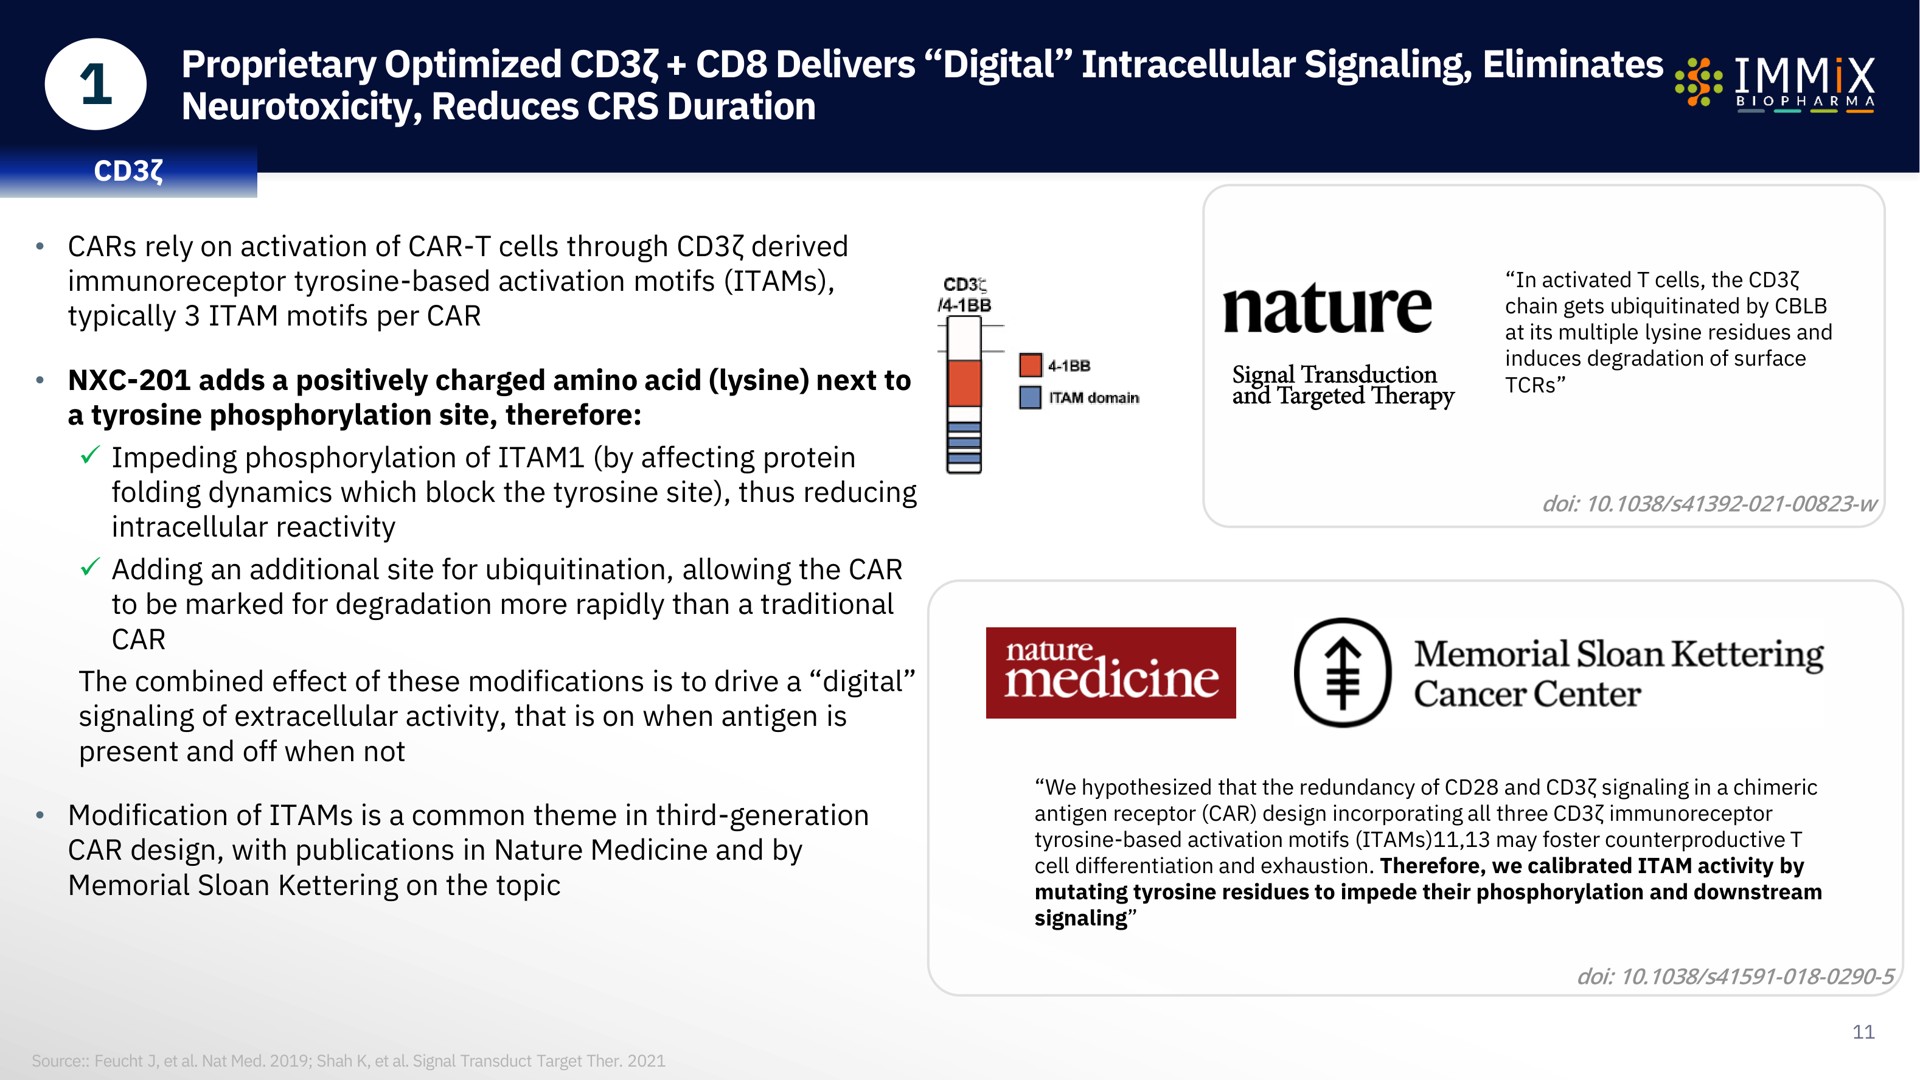 proprietary optimized delivers digital intracellular signaling eliminates reduces duration memorial sloan | Immix Biopharma